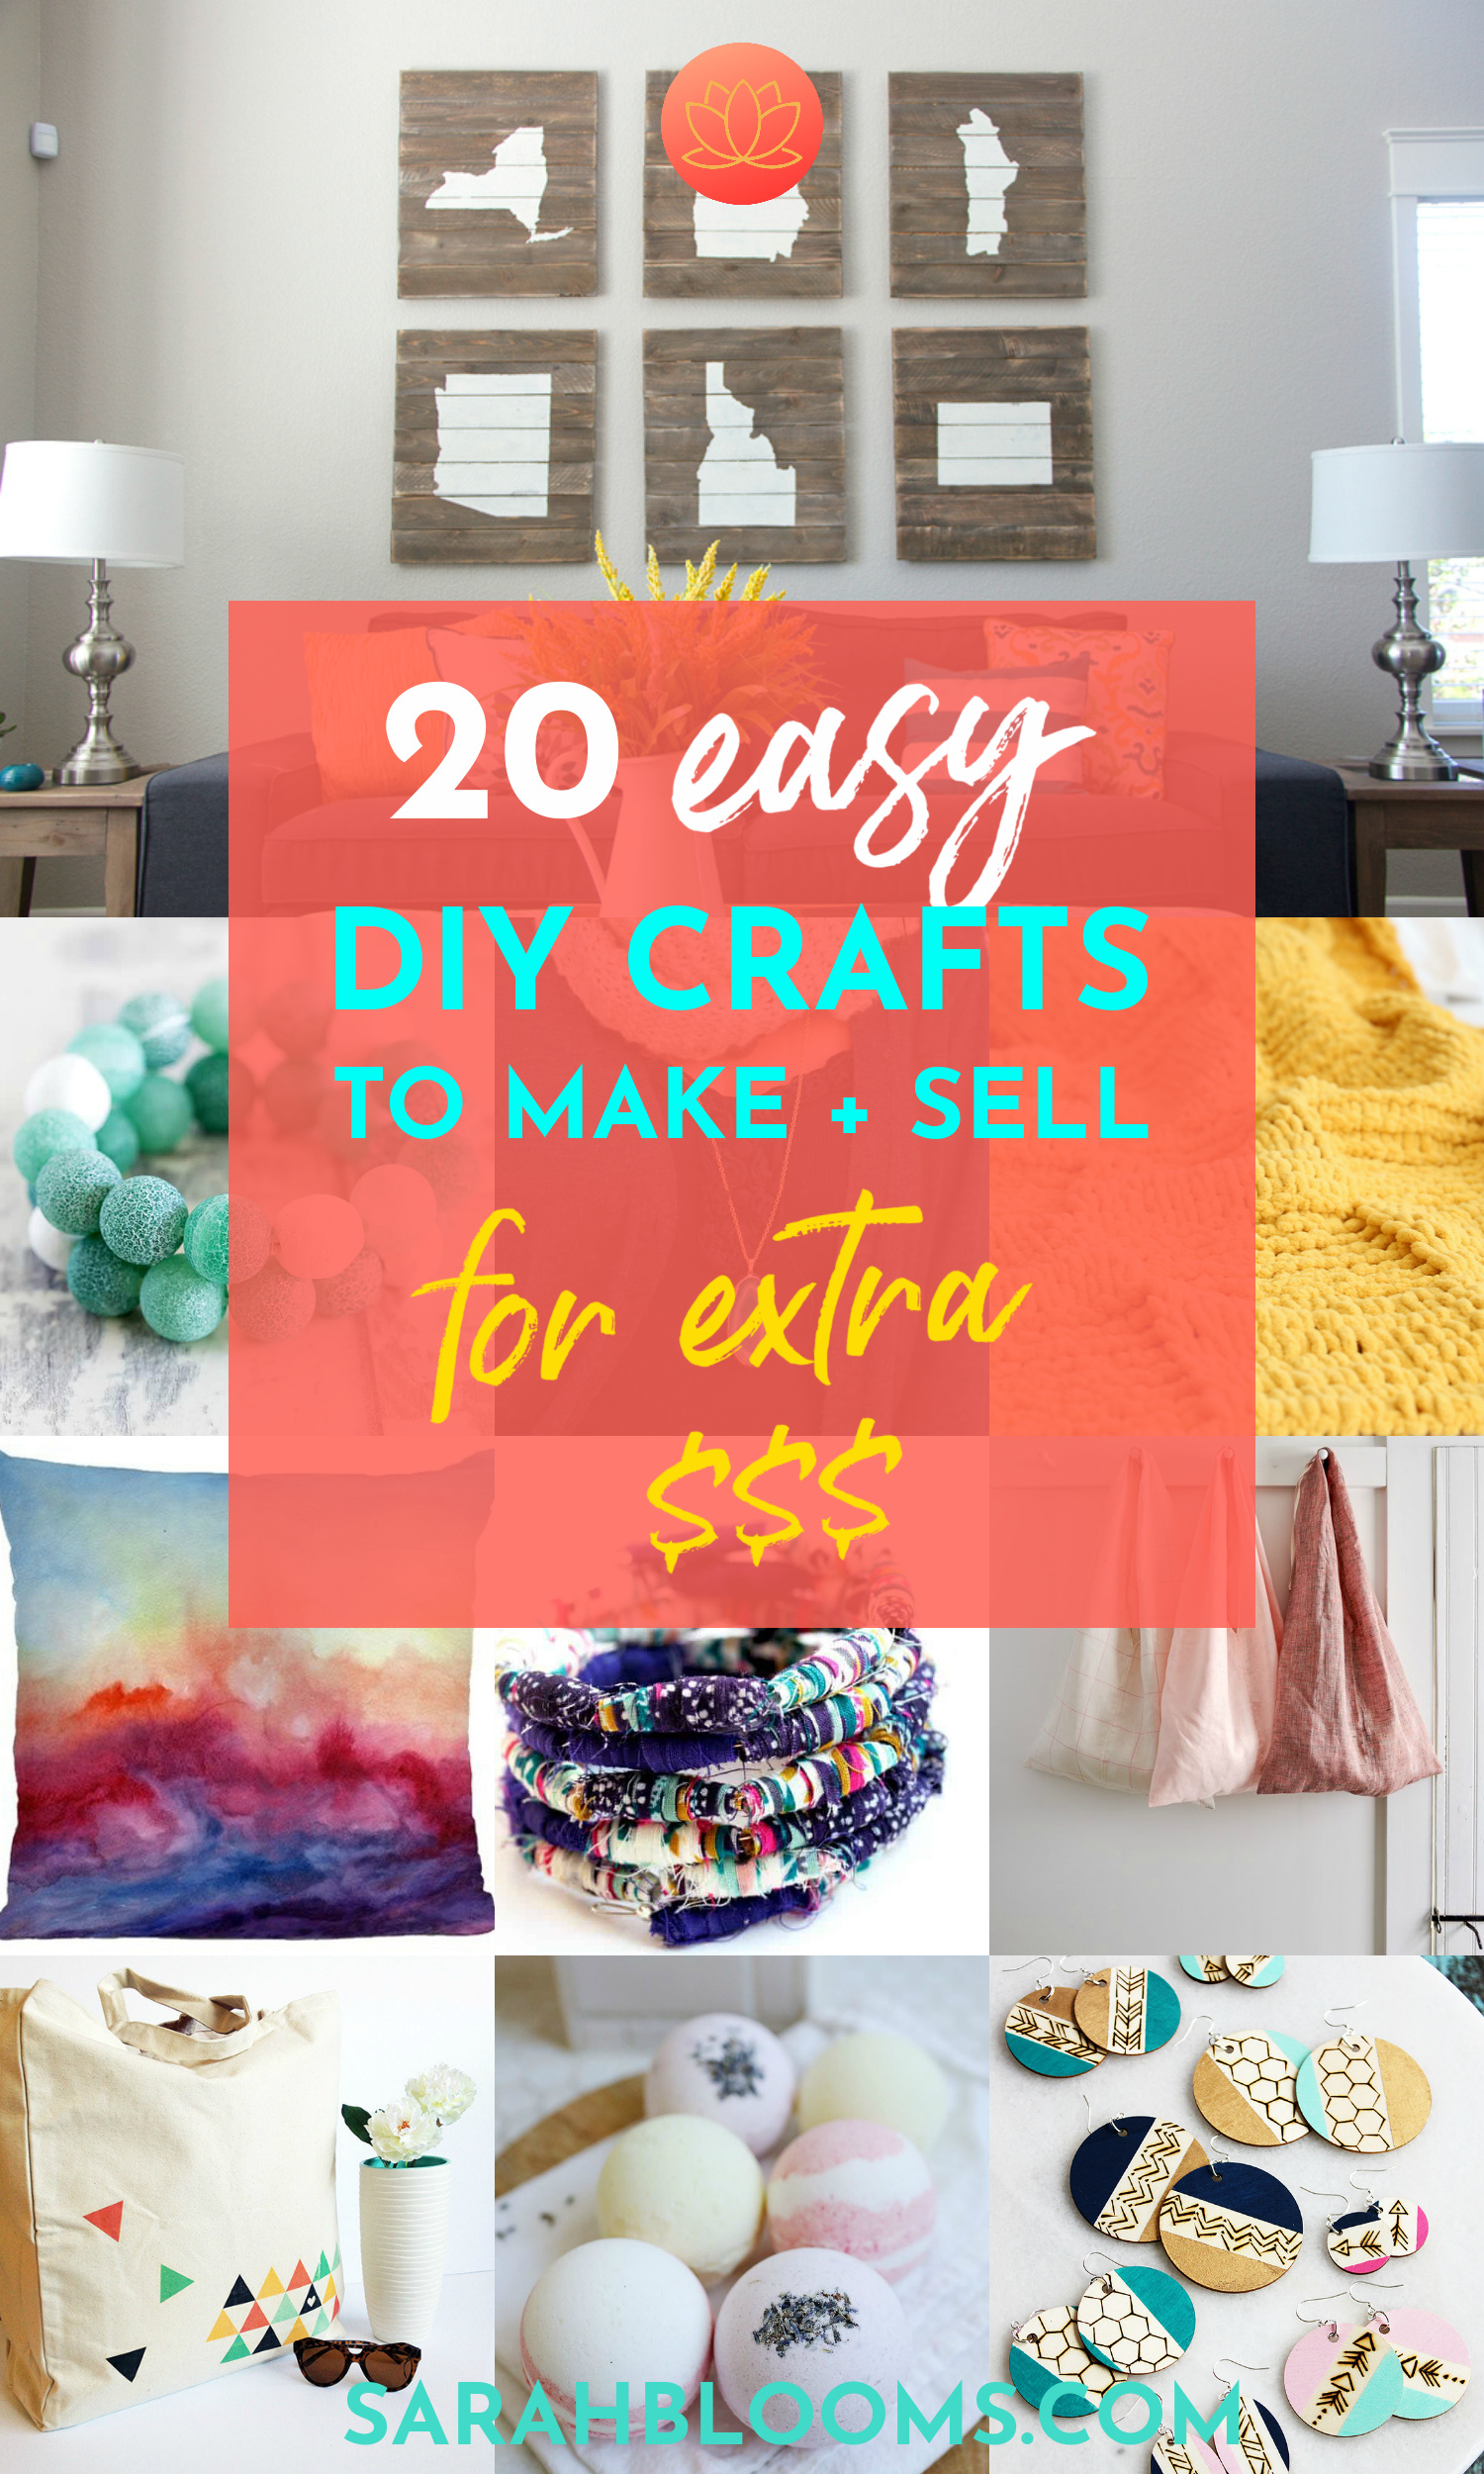 20 Best DIY Crafts to Make and Sell for Extra Money - Sarah Blooms